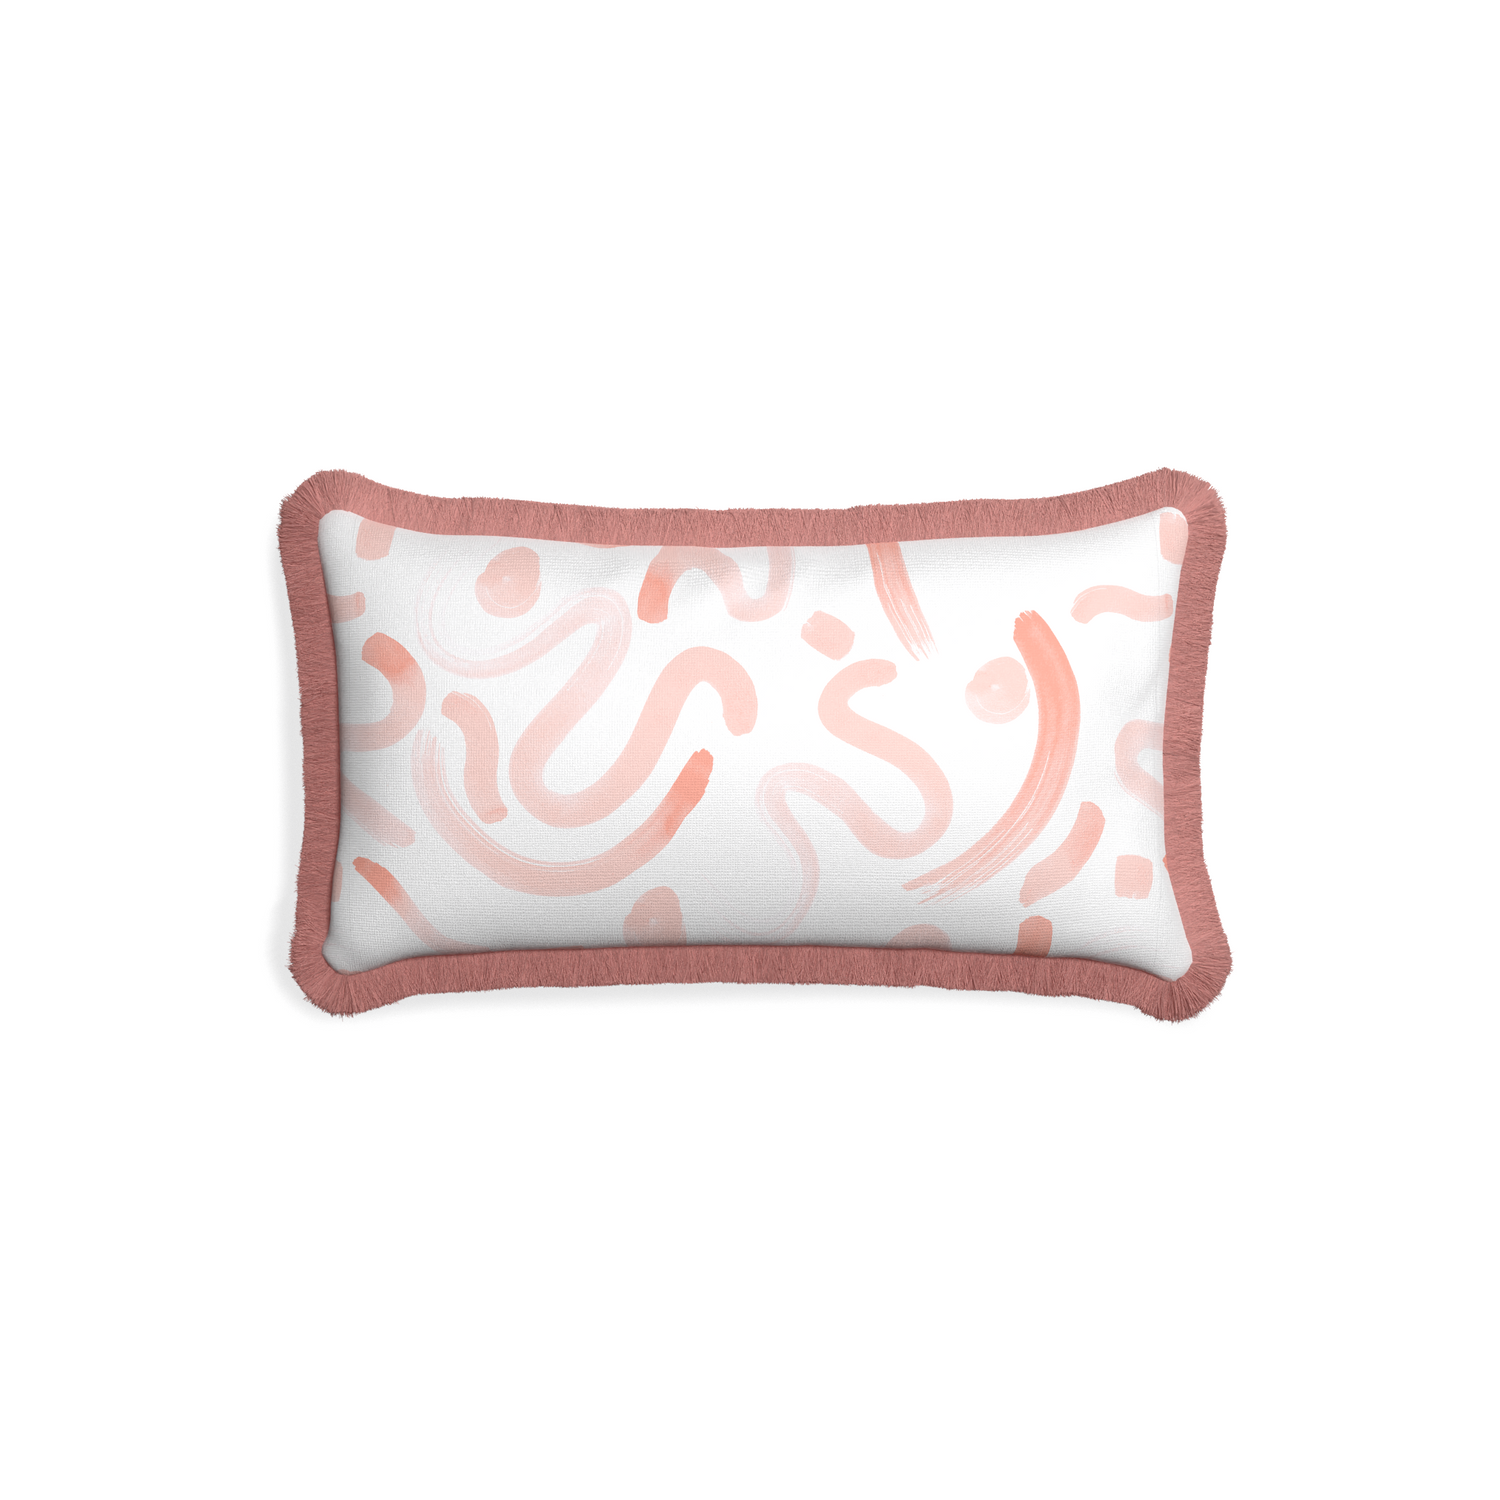 Petite-lumbar hockney pink custom pink graphicpillow with d fringe on white background